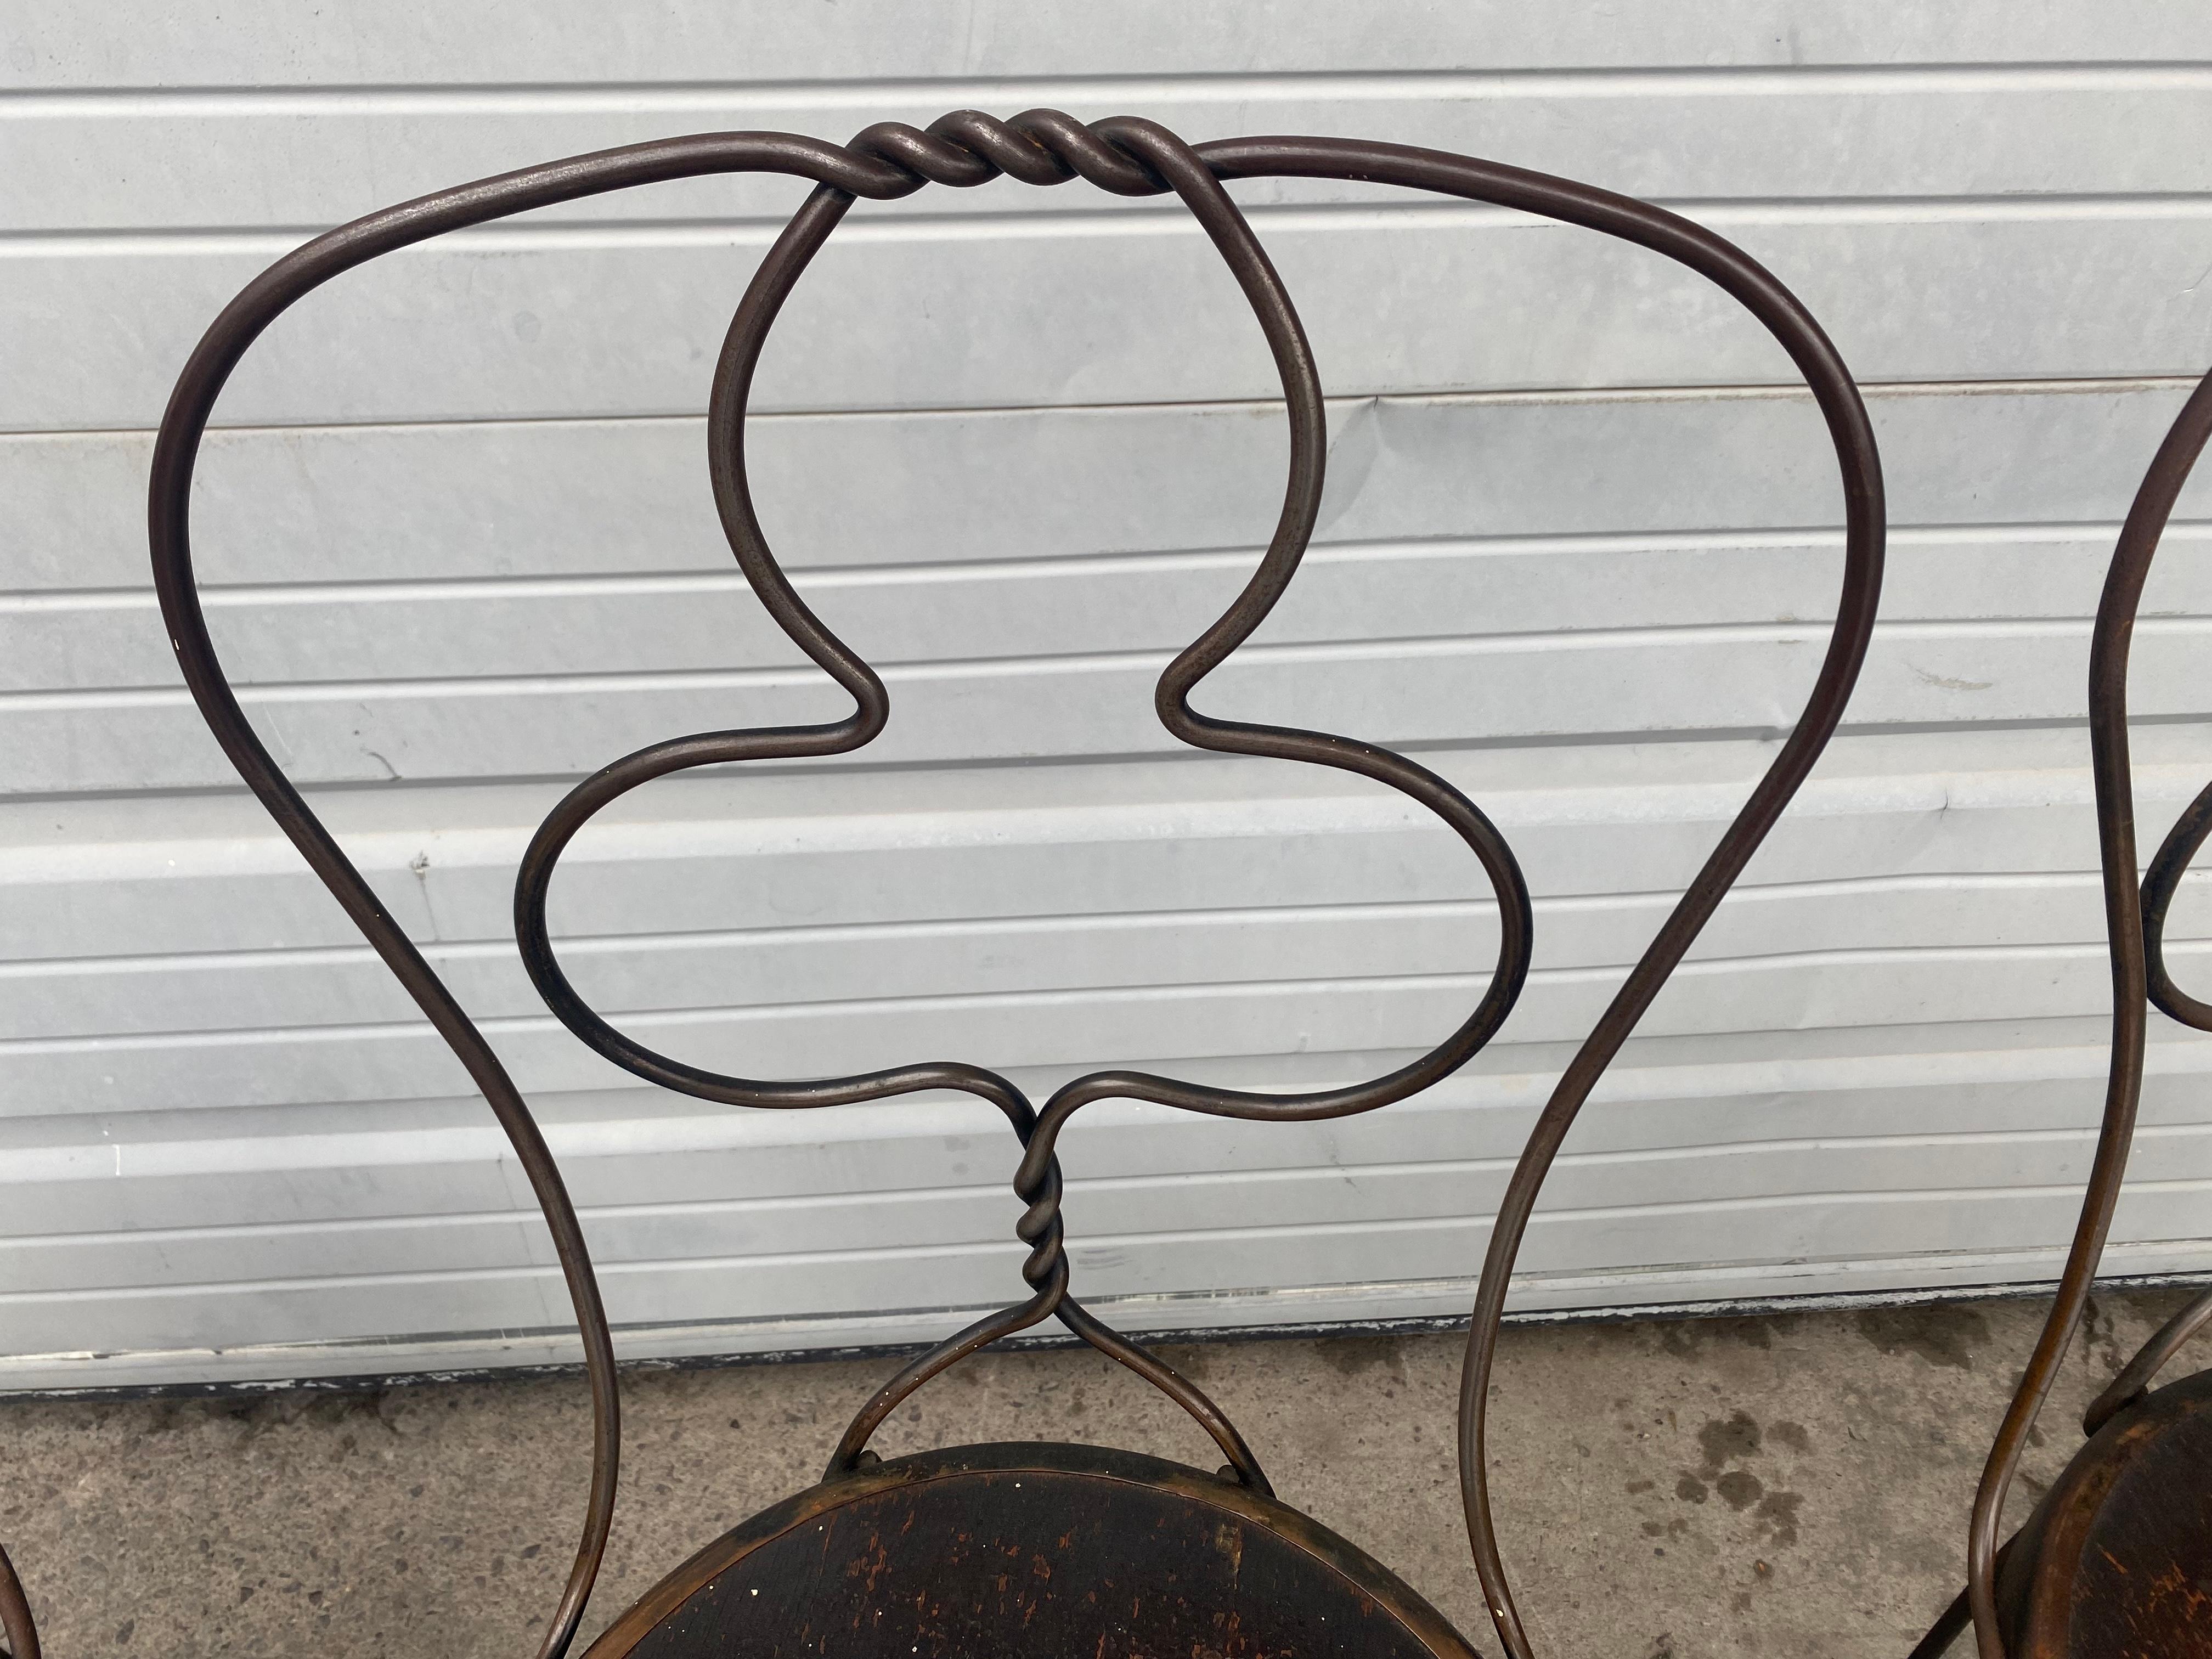 Unusual set wrought iron ice cream parlor chairs, bistro chairs, a set of 4. Wrought iron metal frames, twisted backs and legs. Amazing seldom seen club back design as well as twisted iron center finial. Wonderful original patina /finish.
 